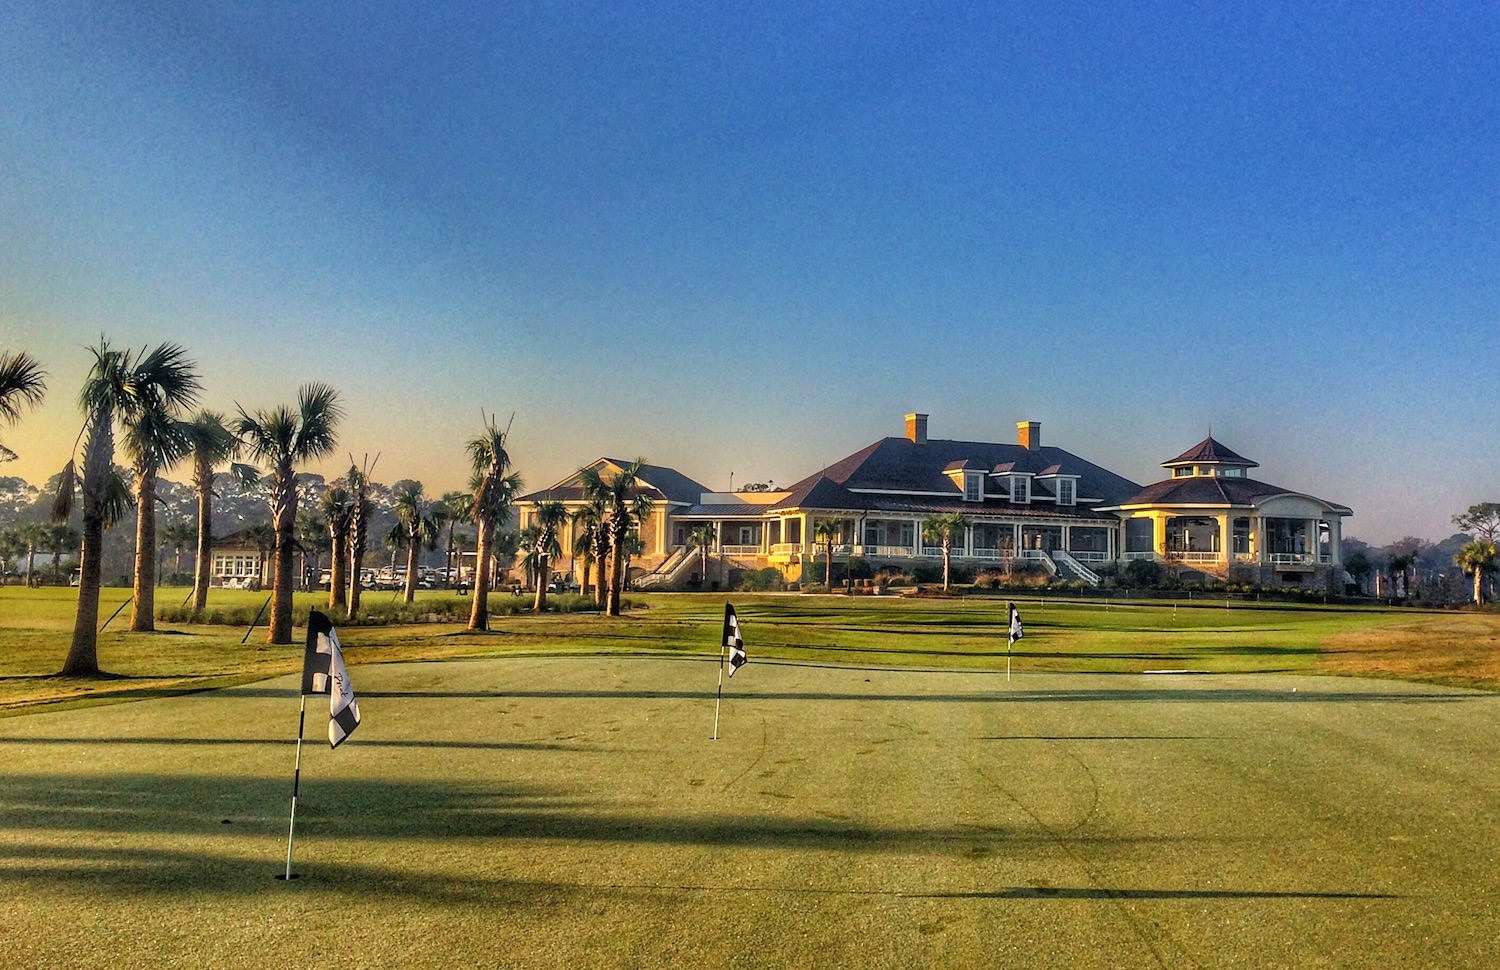 The short game practice facility at Sea Pines' Heron Point and Atlantic Dunes courses is both functional and scenic. (Brandon Tucker/Golf Advisor)